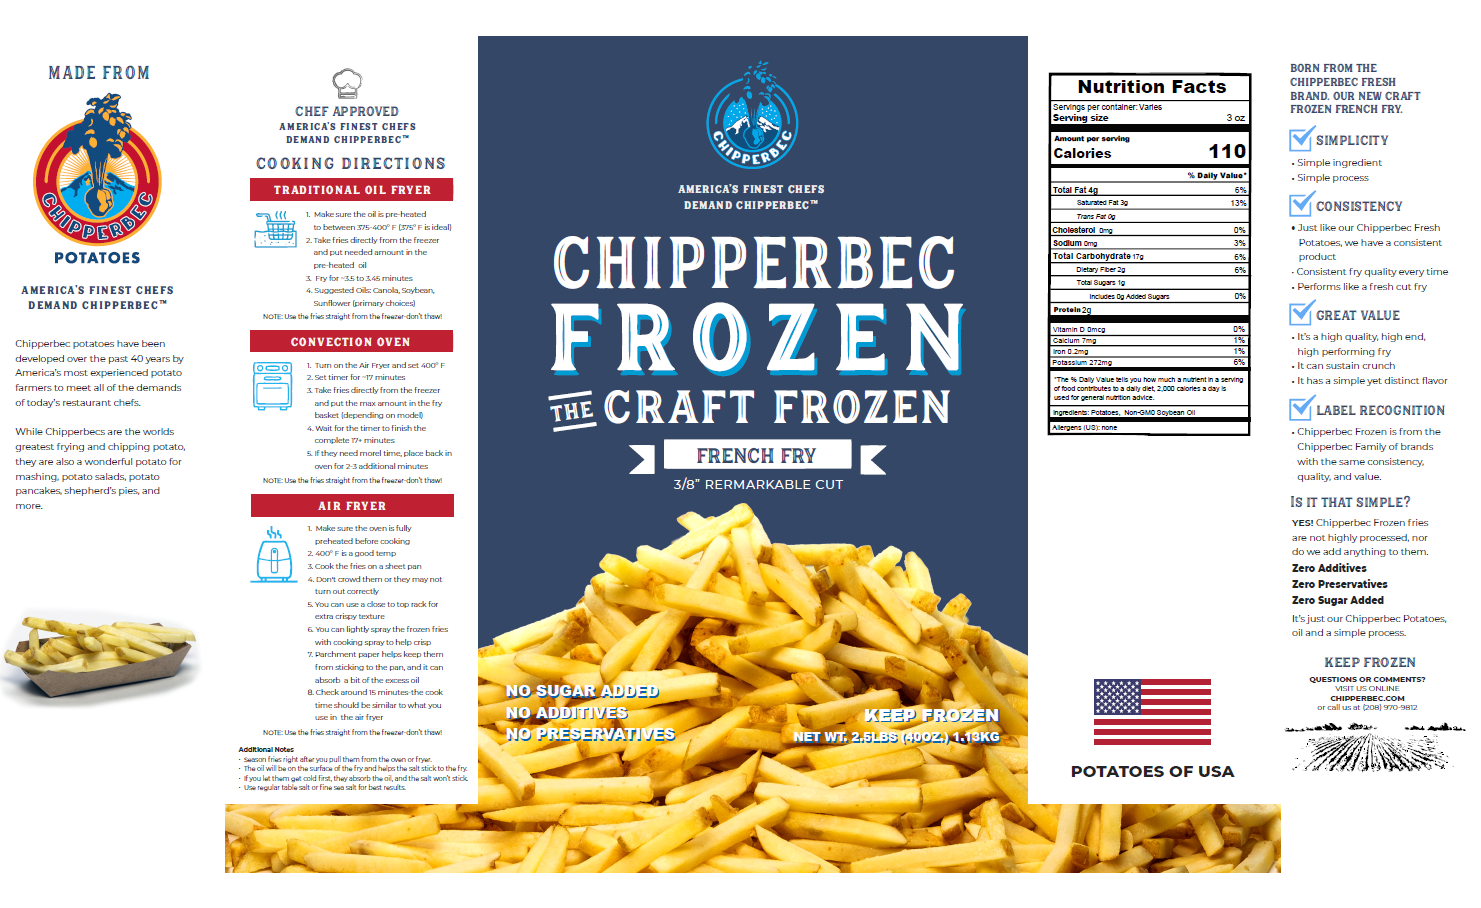 Chipperbec 3/8'' REMARKABLE Cut French Fries (Food Service) 12 units per case 2.5 lbs Product Label